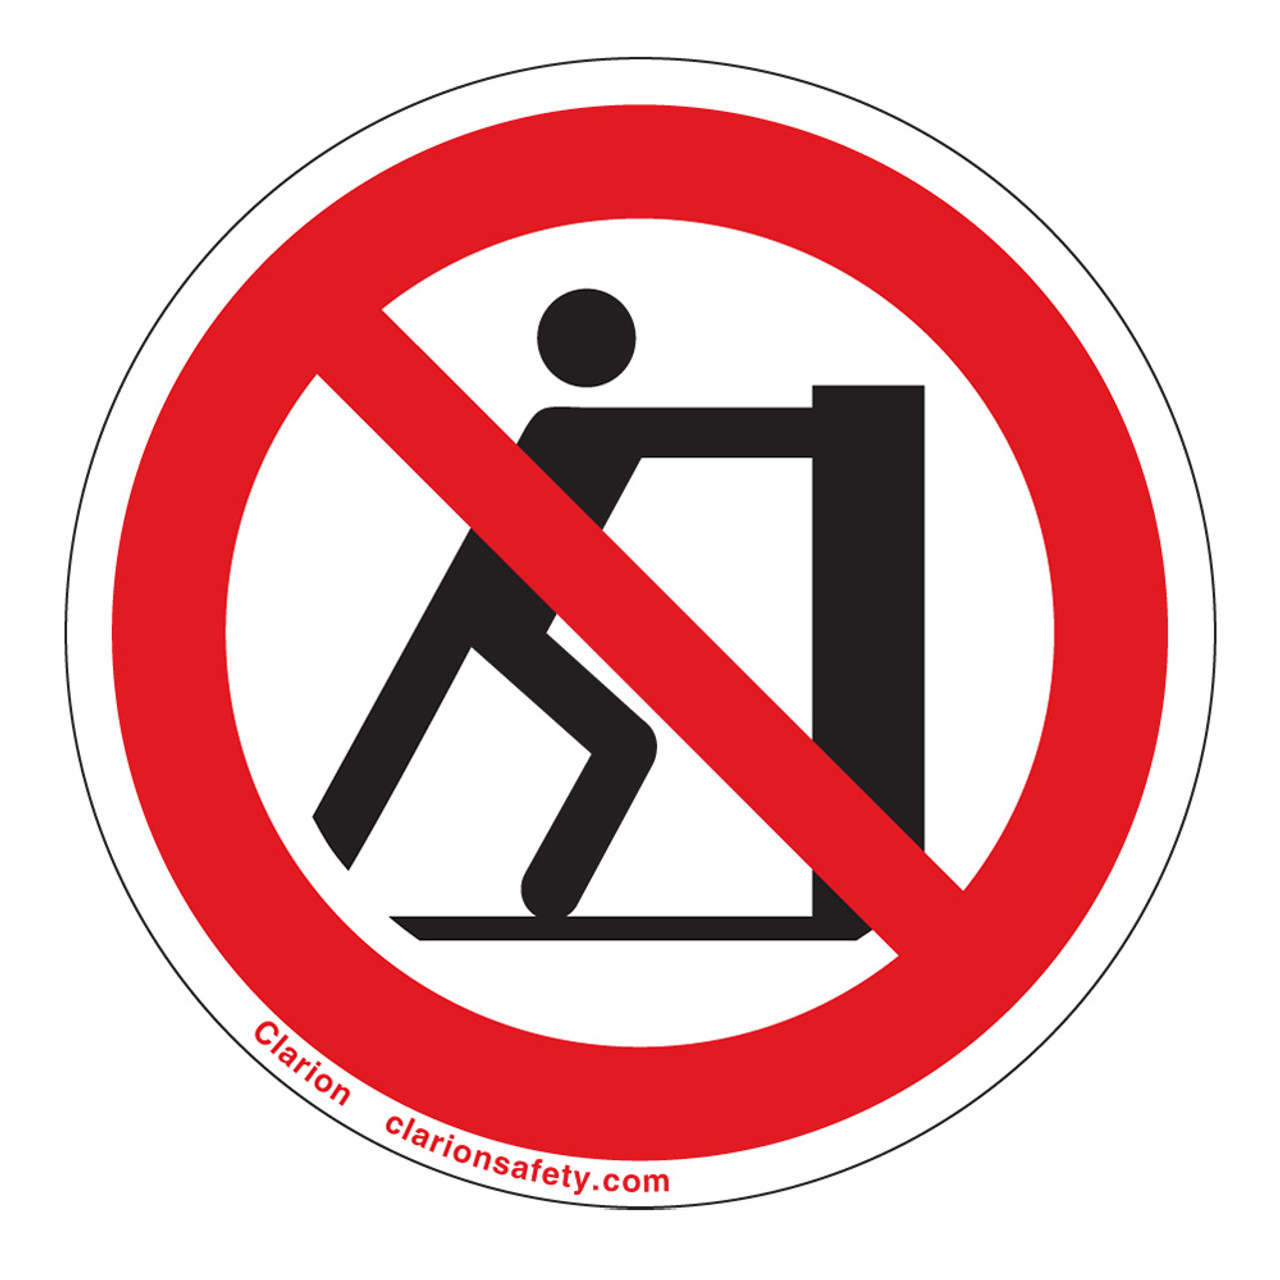 Do Not Push (IS6066-) Label